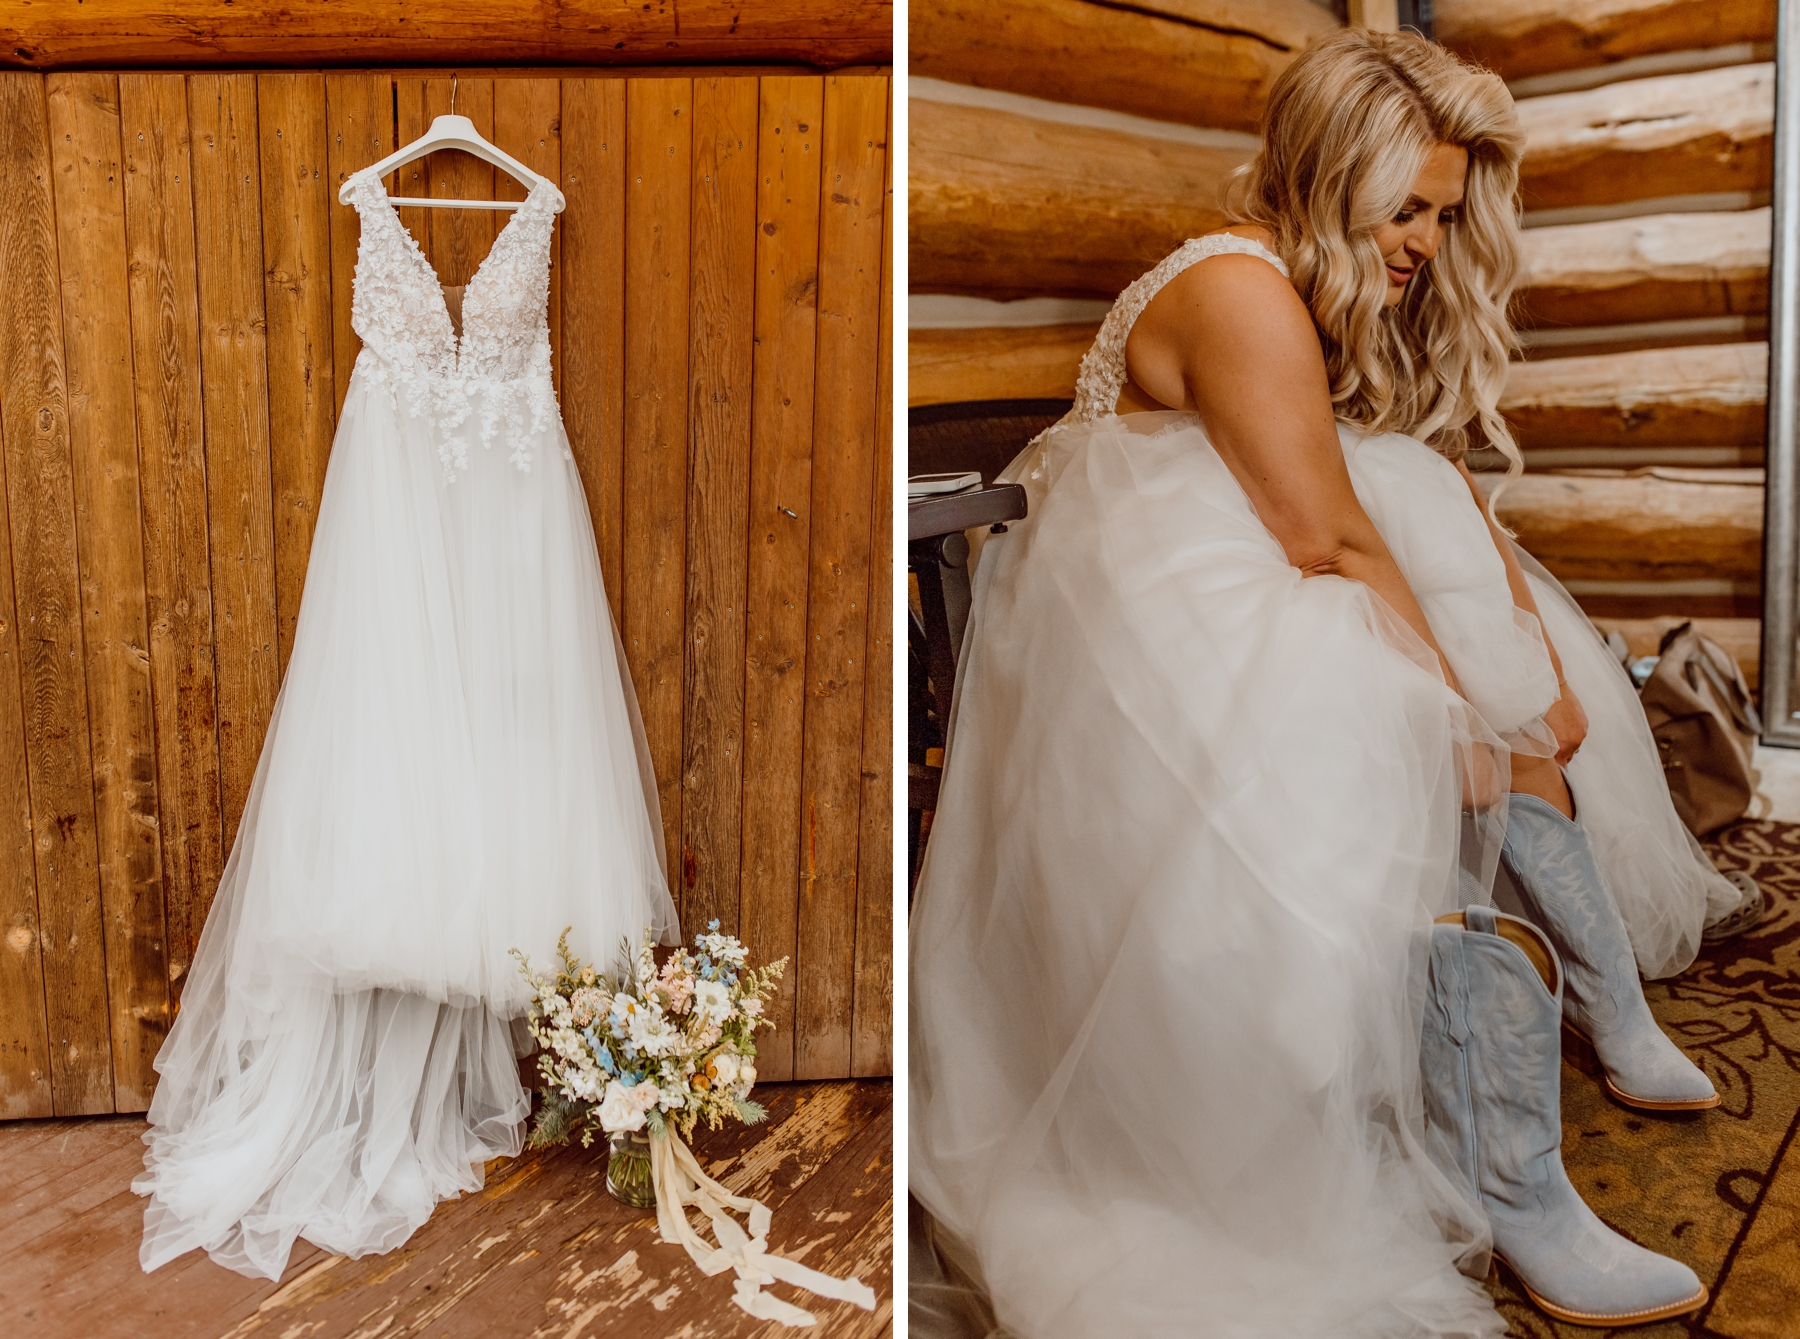 A-line tulle wedding dress hanging in front of wood wall | bride putting on pale blue cowboy boots